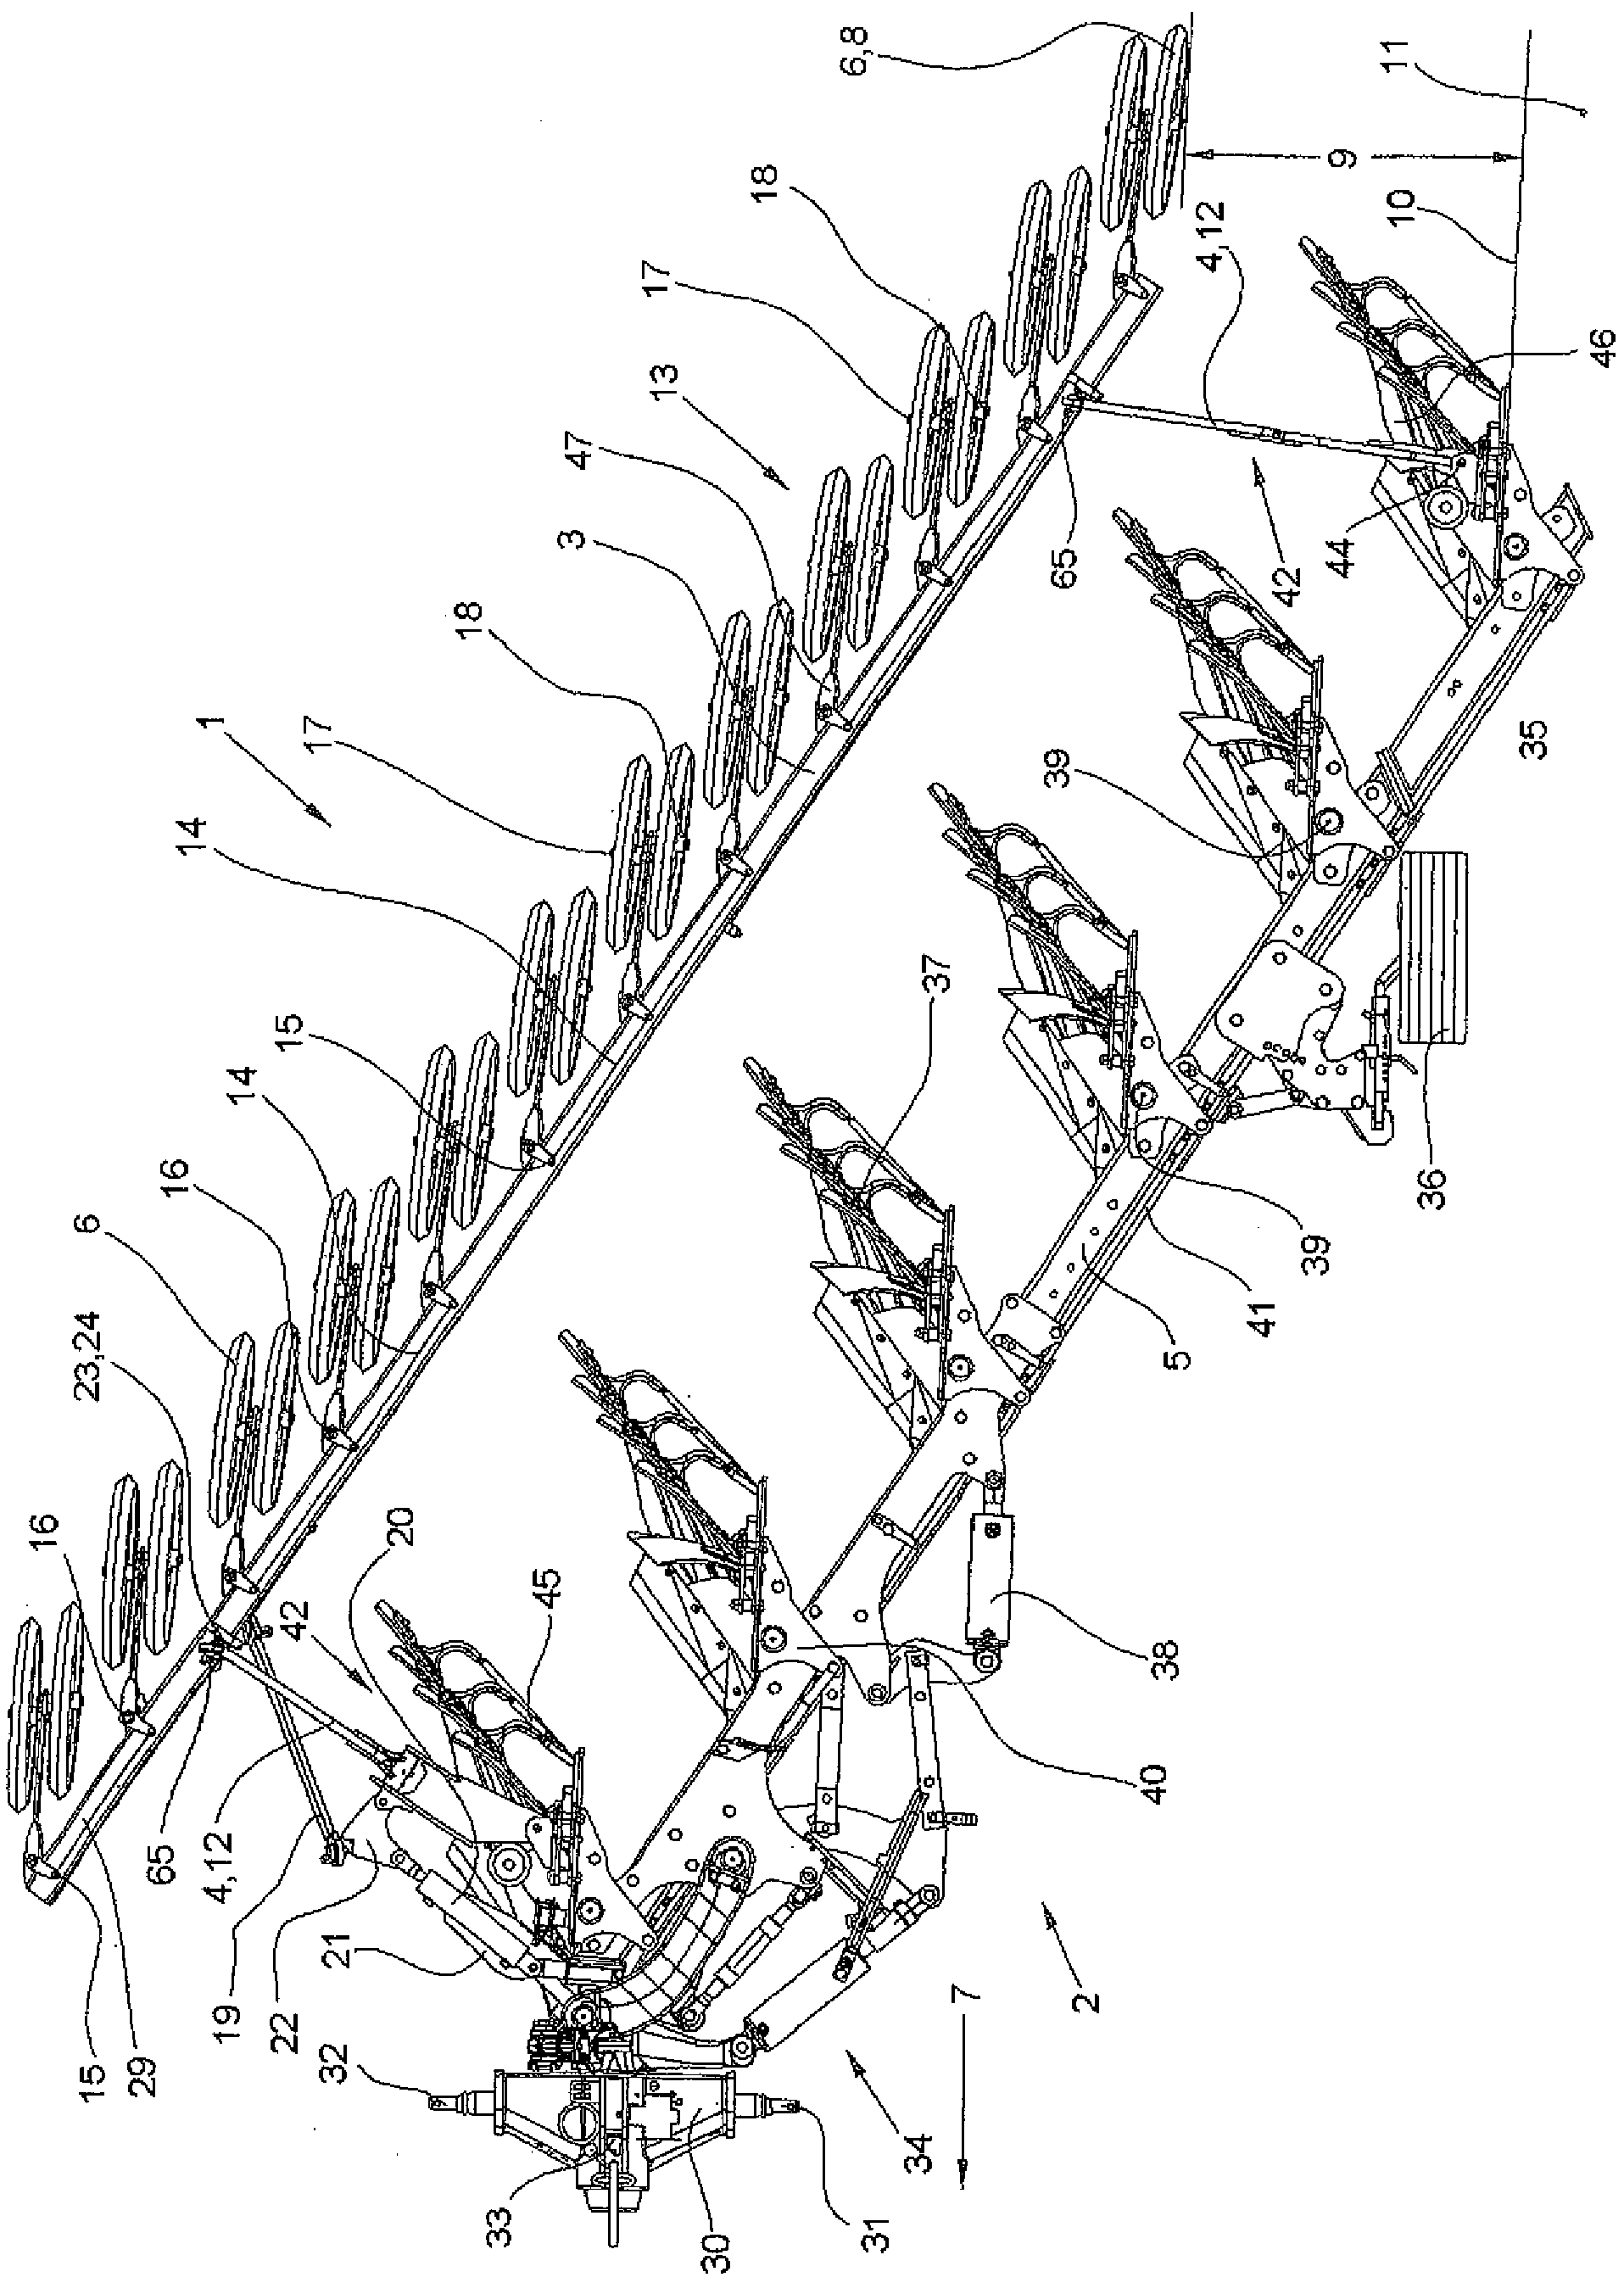 Integrated soil-tilling apparatus for rotary ploughs